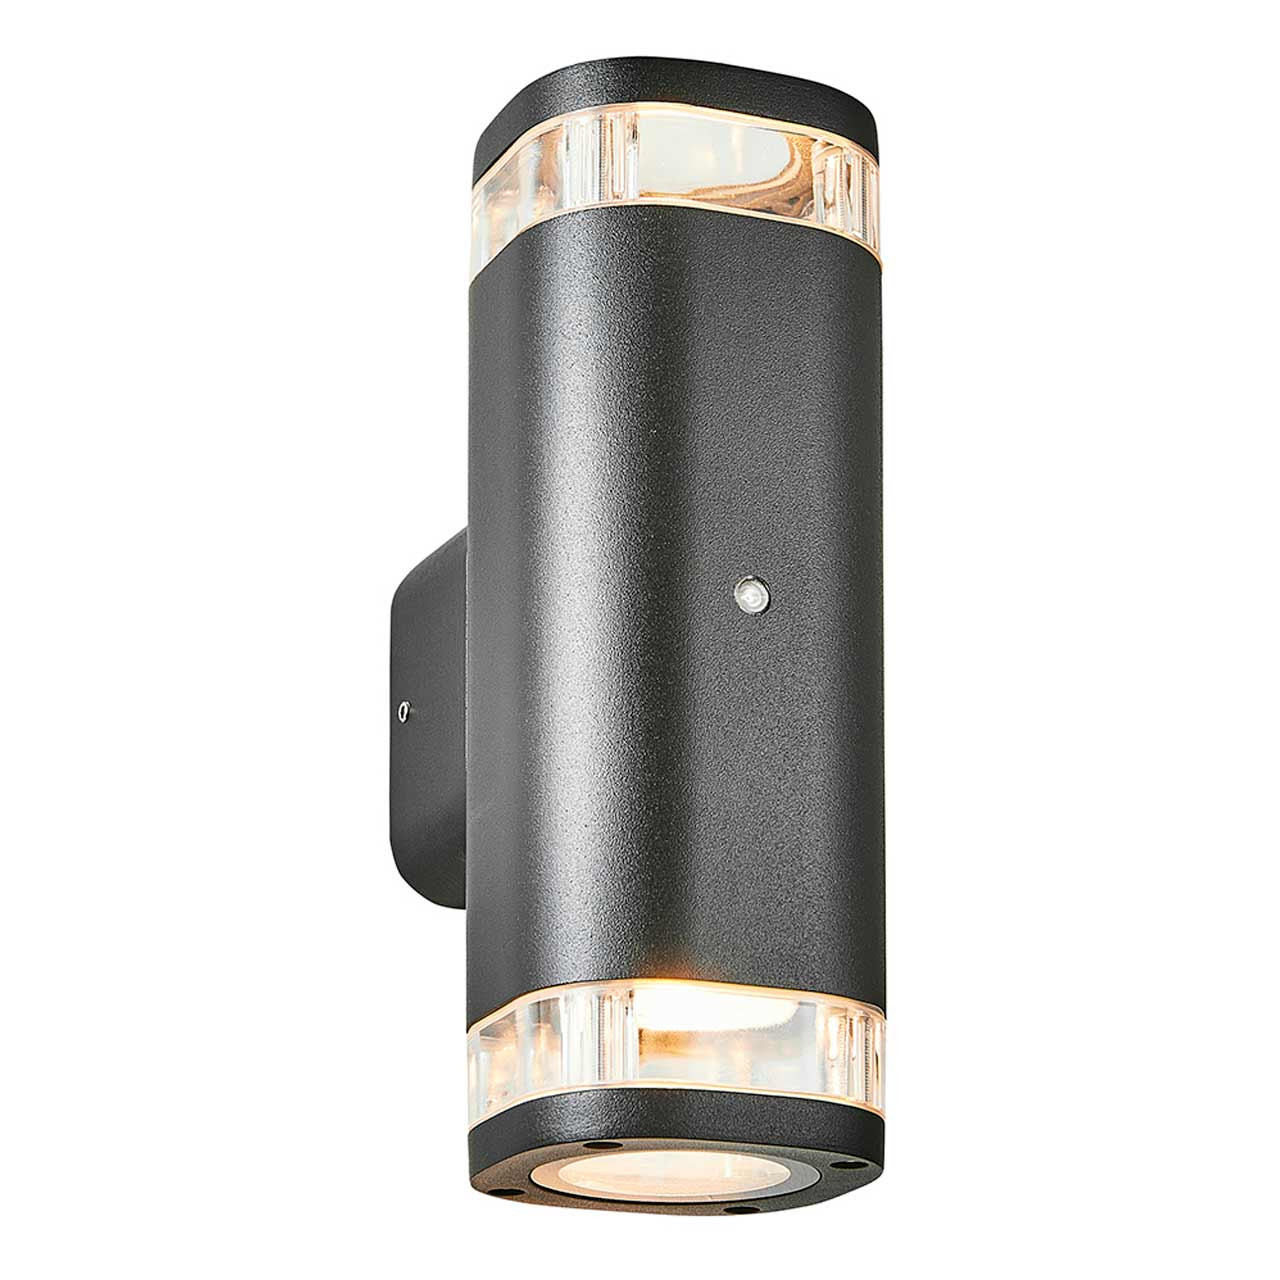 Zink EOS Outdoor Up and Down Wall Light with Dusk til Dawn Sensor Black